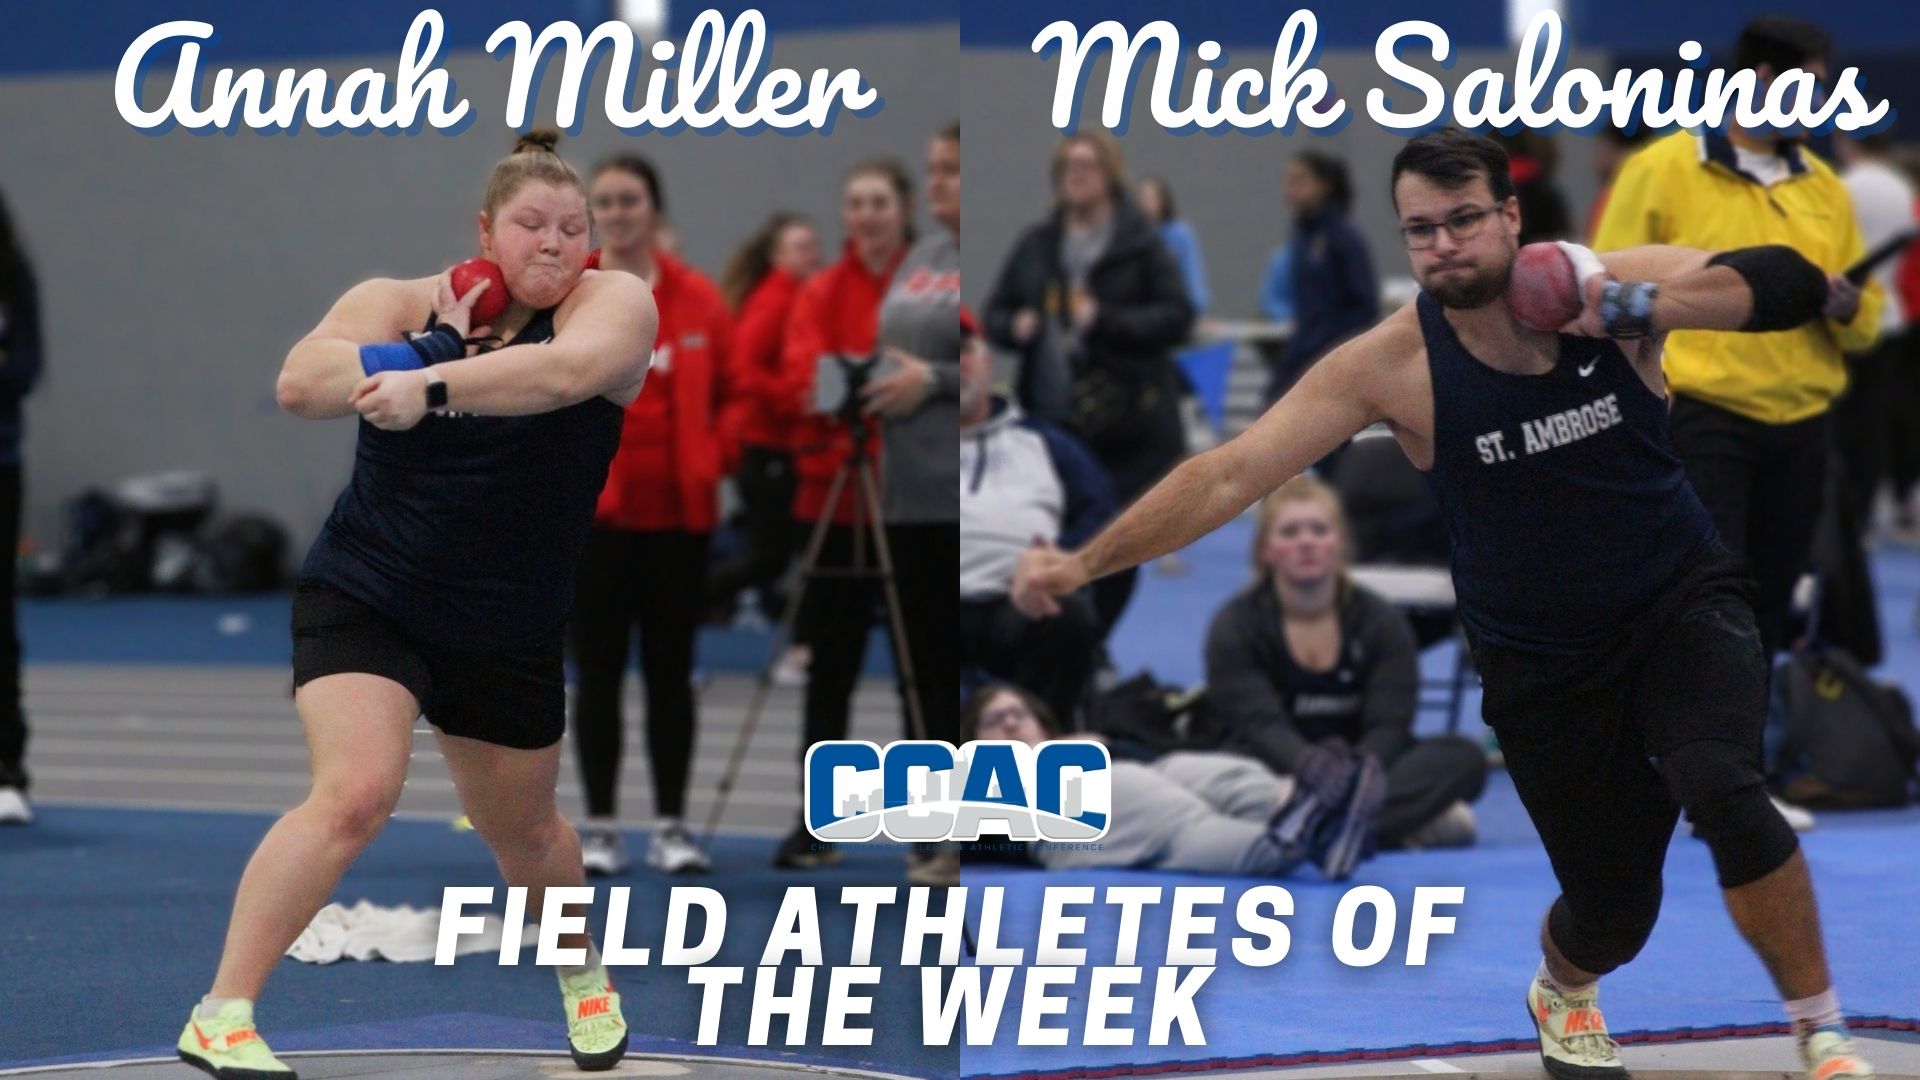 Miller, Saloninas named CCAC Field Athletes of the Week